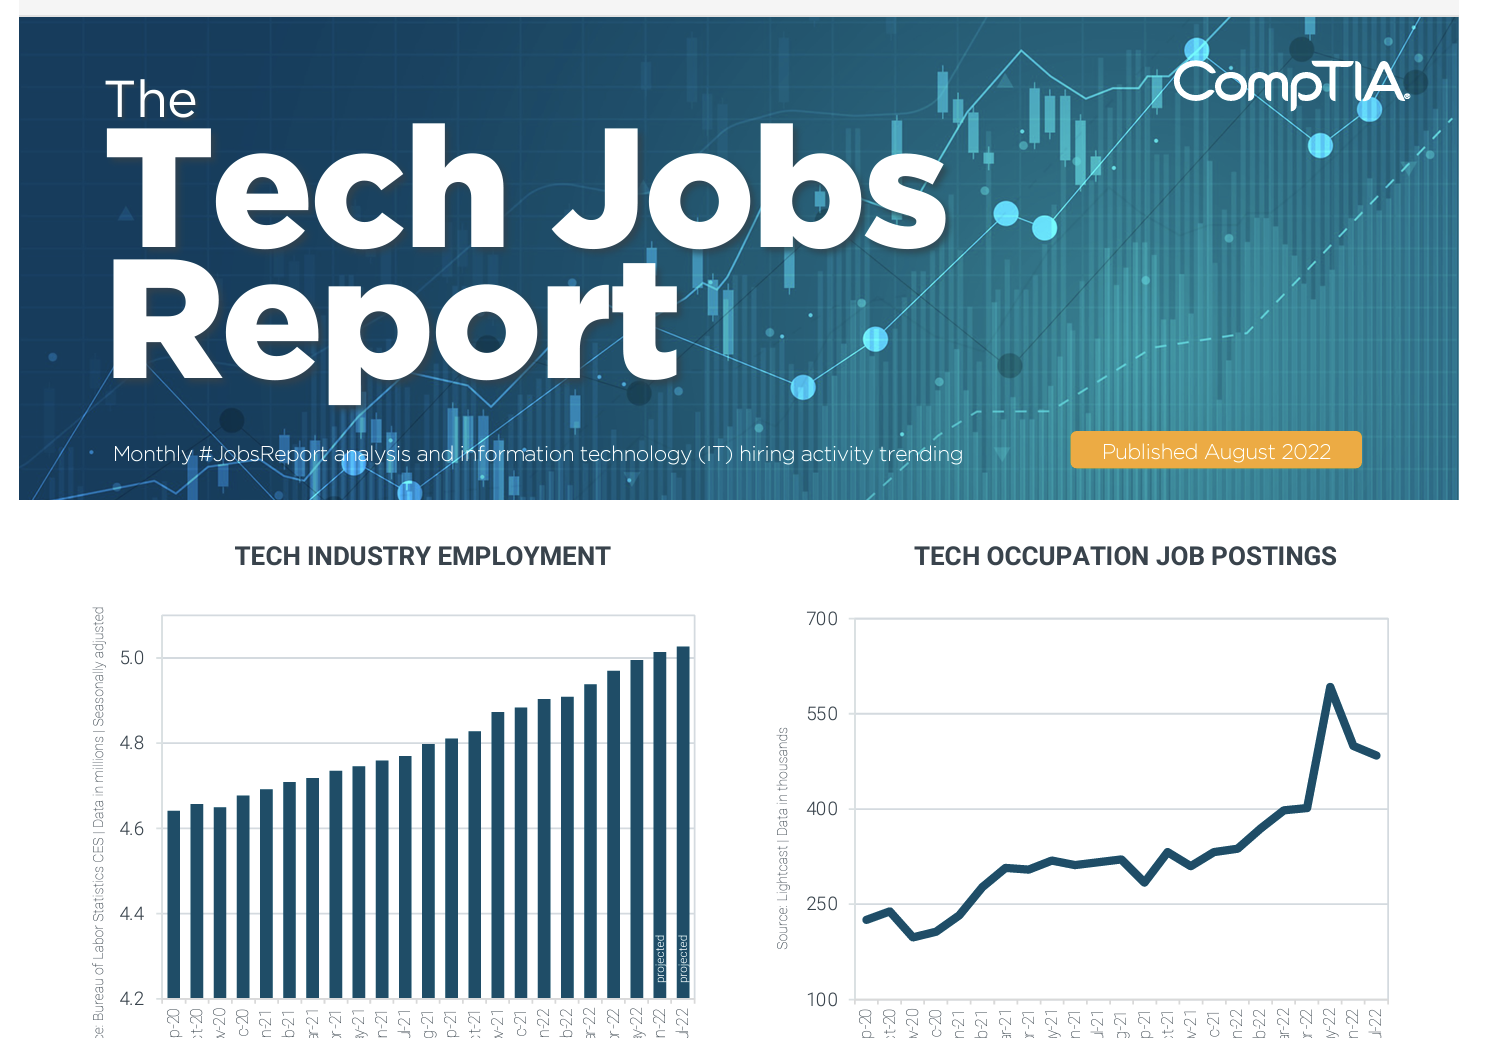 CompTIA Analysis Finds Strong Job Market with Low Unemployment in